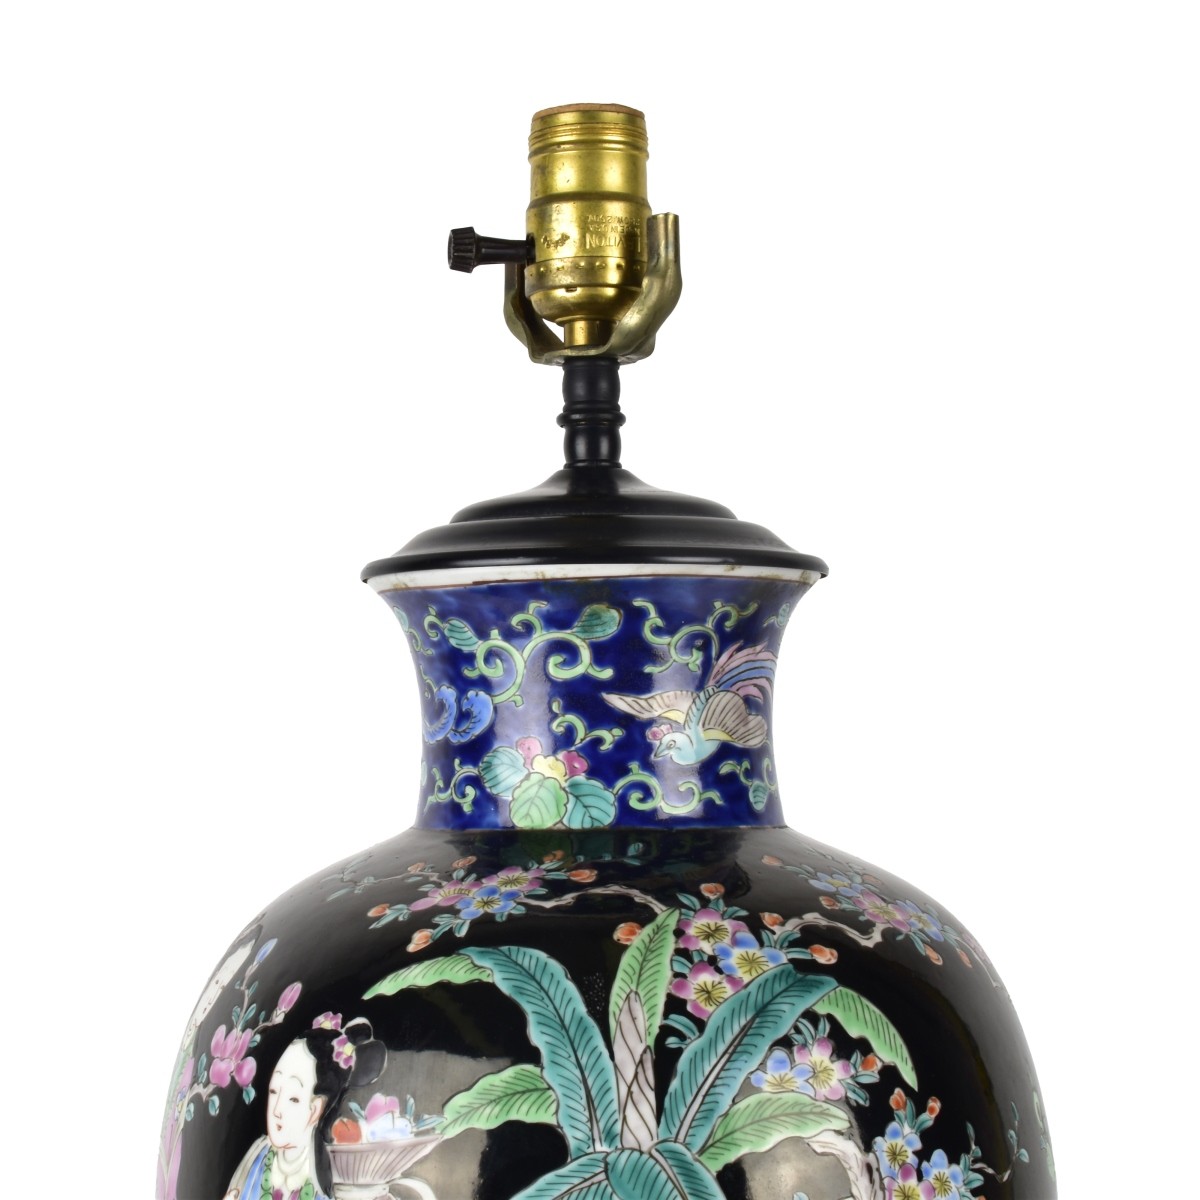 Large Chinese Vase Presented as a Lamp